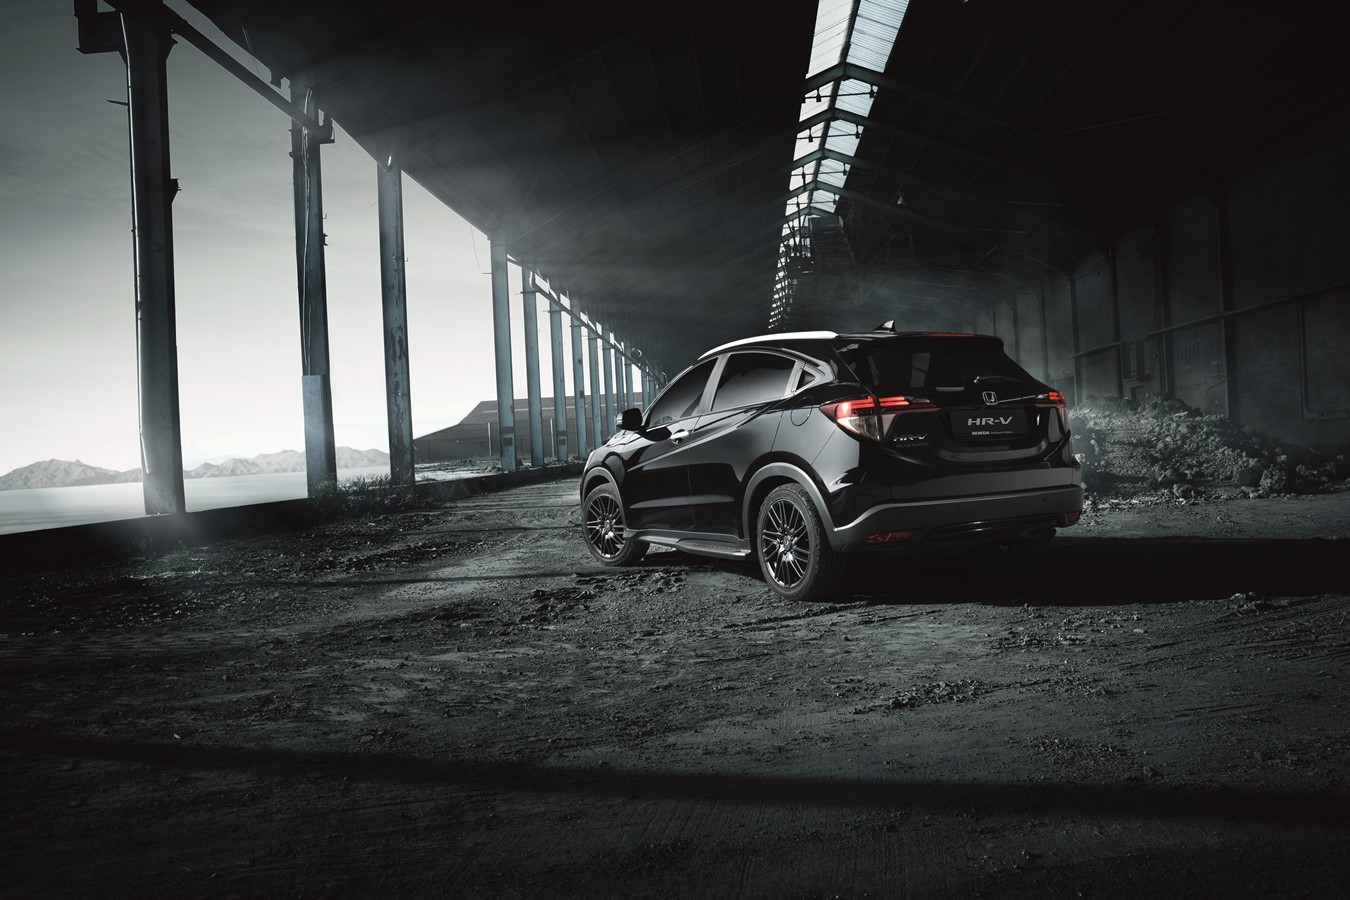 HR-V next to get the Black Edition treatment as Honda also extends the limited run of CR-V Black Edition